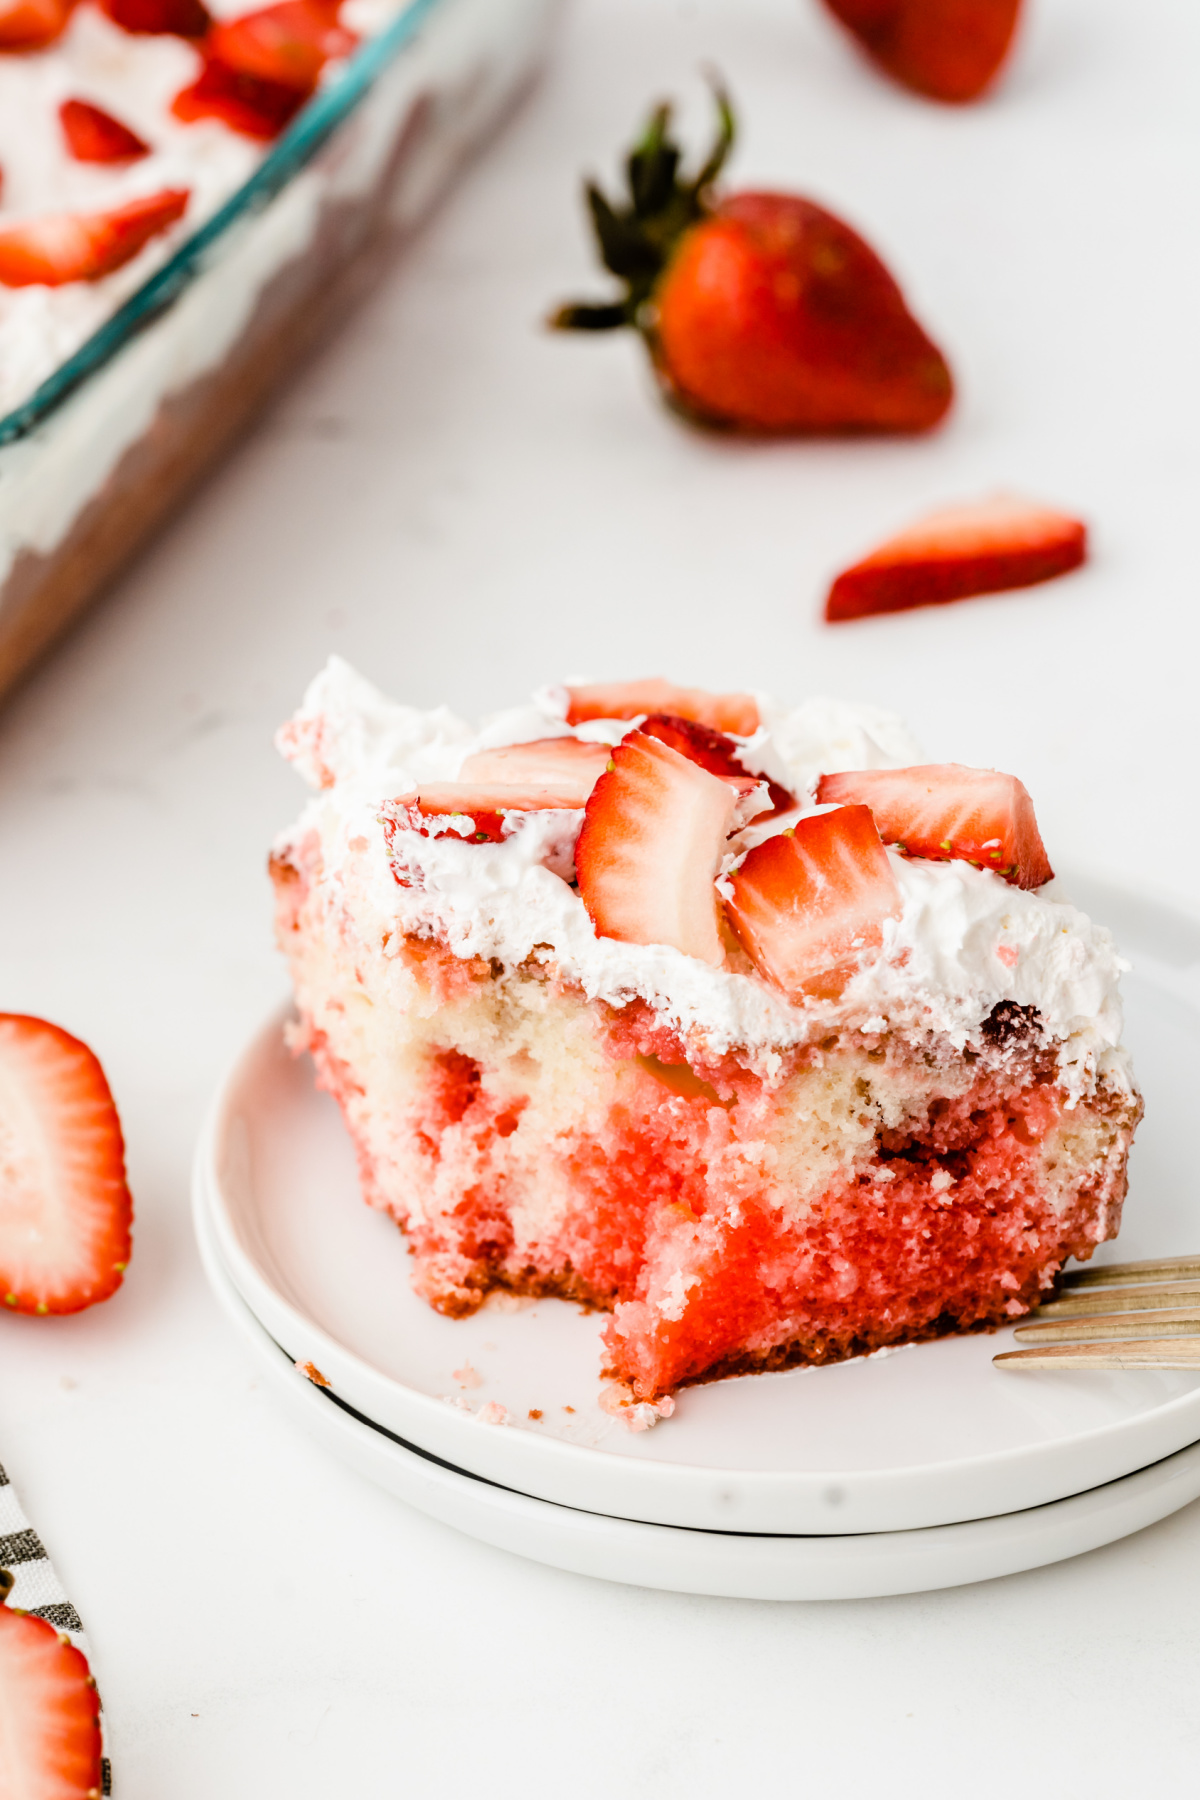 A slice of strawberry poke cake with whipped cream and fresh strawberry slices on a white plate.